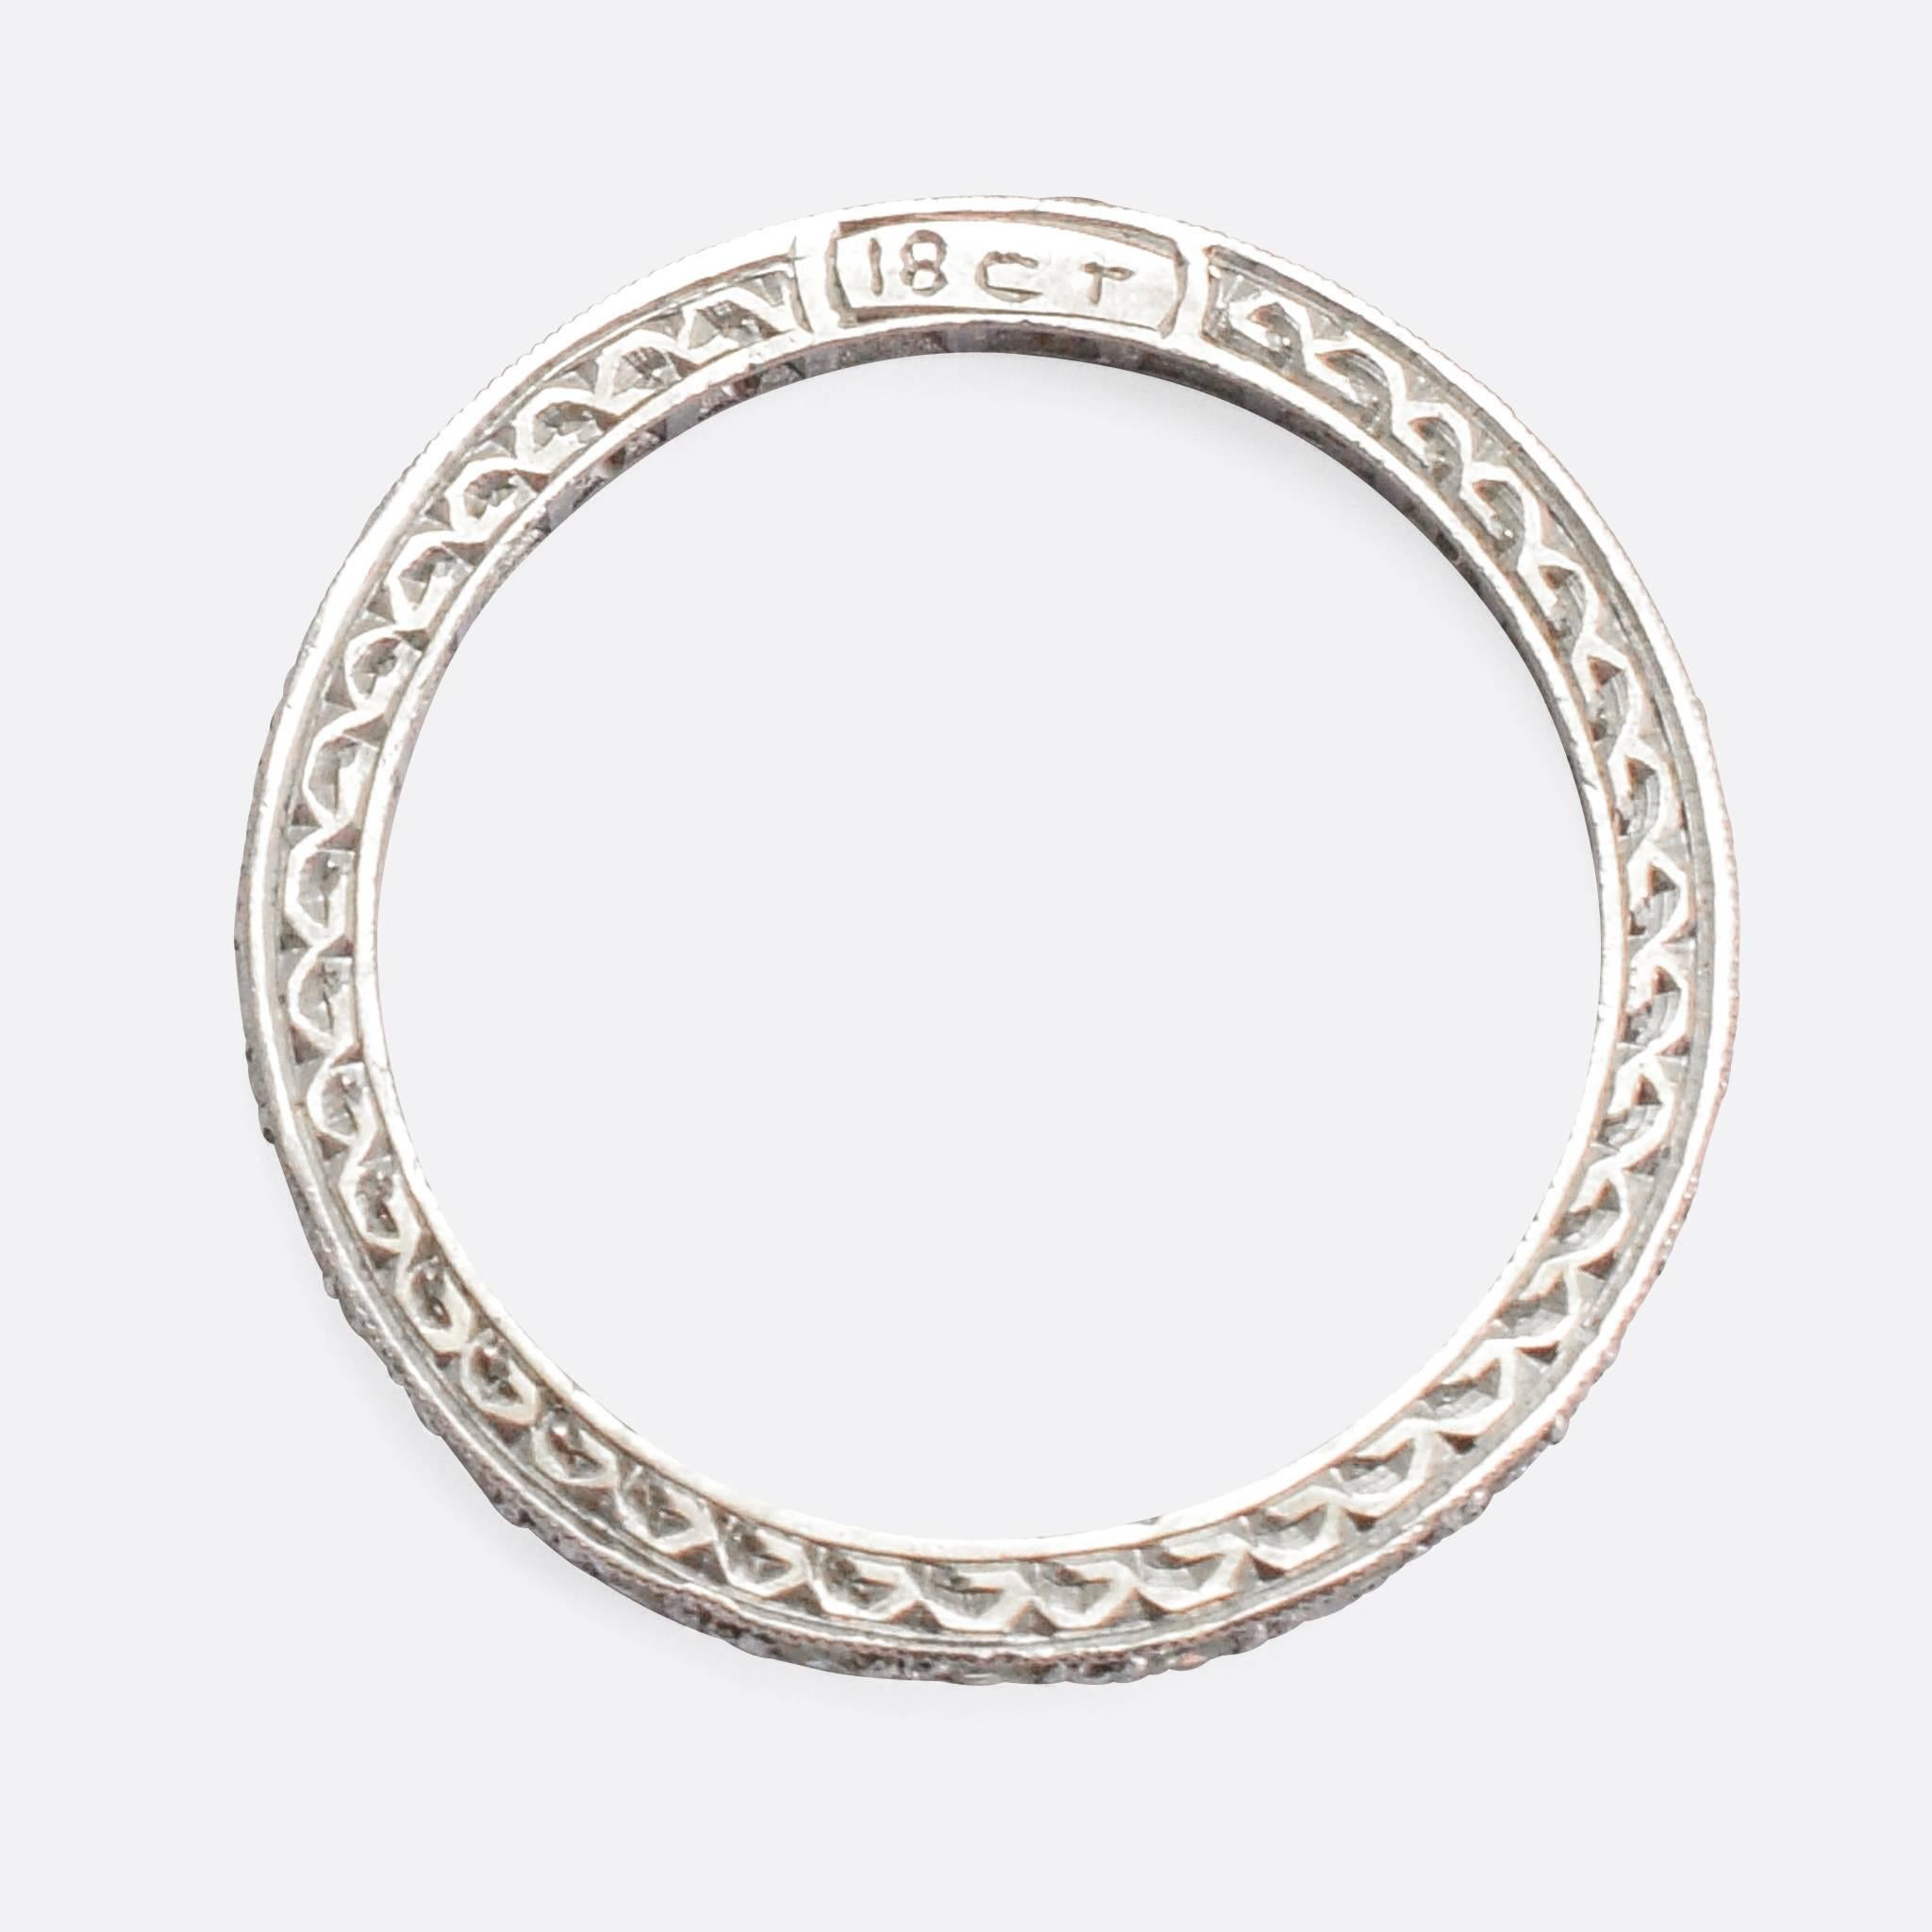 An exceptional 1920s Eternity Ring, modelled in 18k white gold and fully set with diamonds. The detail to the sides and settings is beautiful, with hand chased patterns and miellgrain edges. It's set with 26 sparkling eight-cut stones, very typical